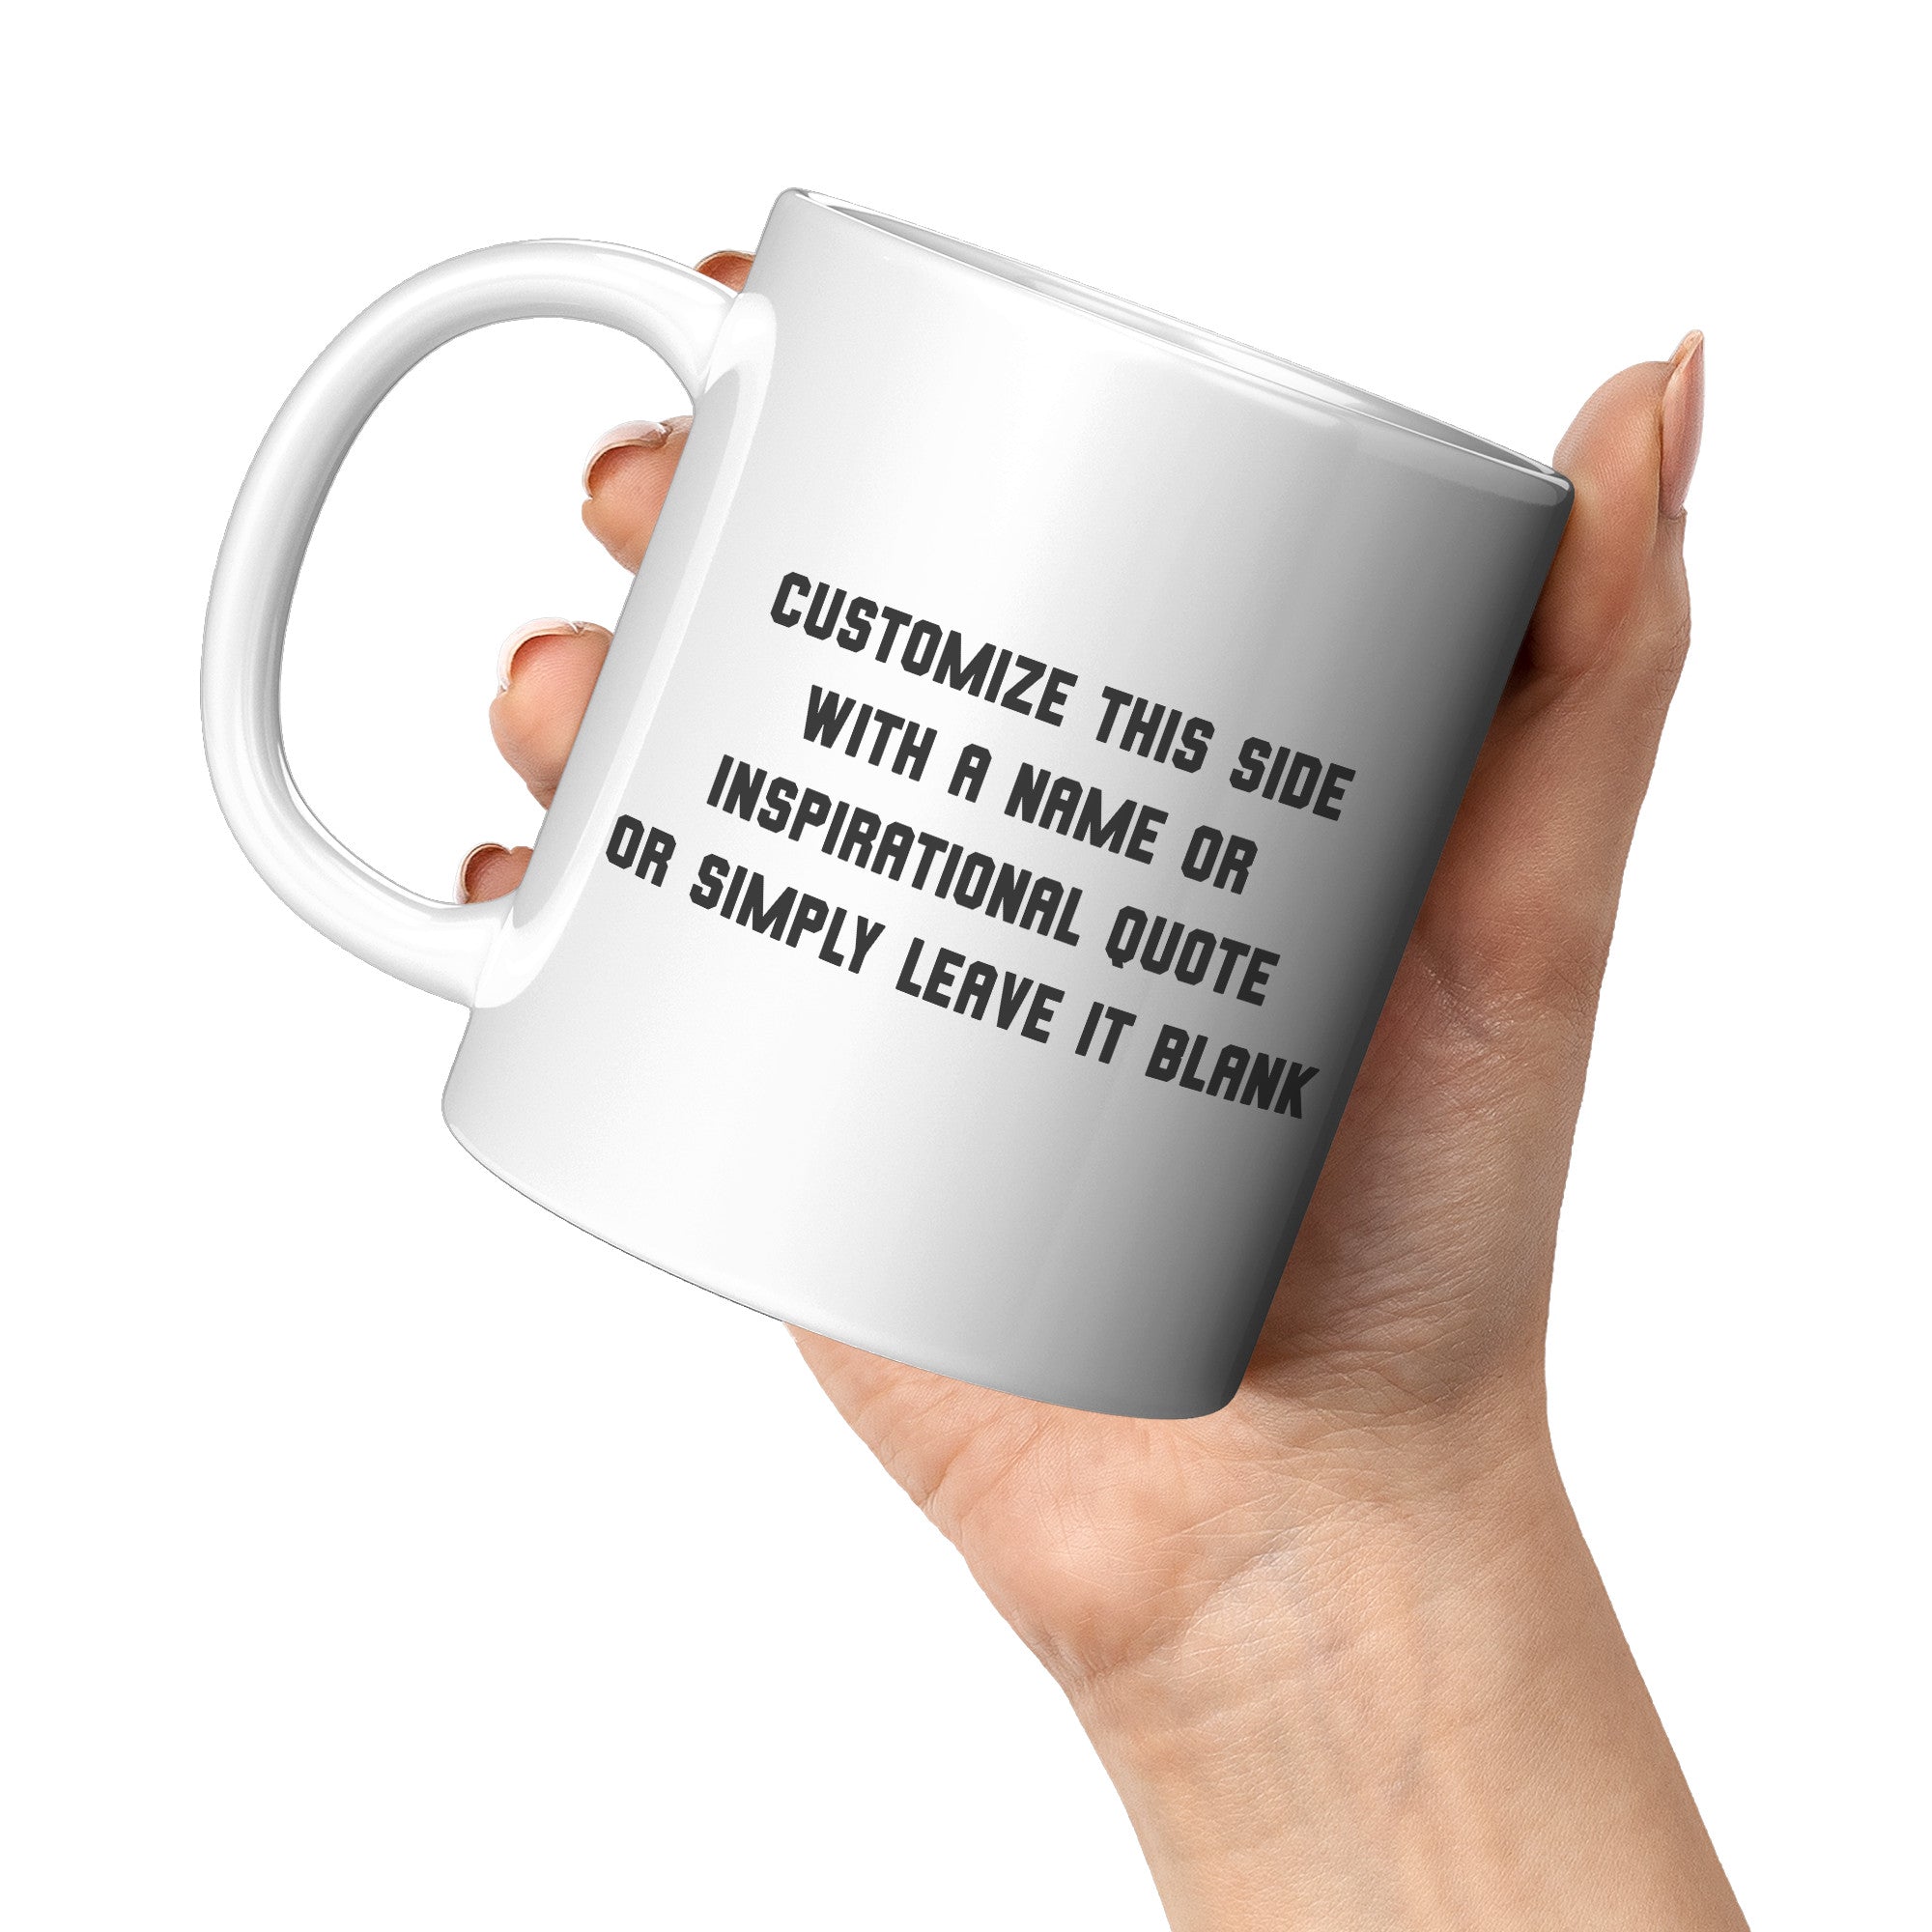 Male Runner Inspirational Mug - Motivational Running Quotes Cup - Perfect Gift for Marathon Men - Runner's Daily Dose of Determination - B